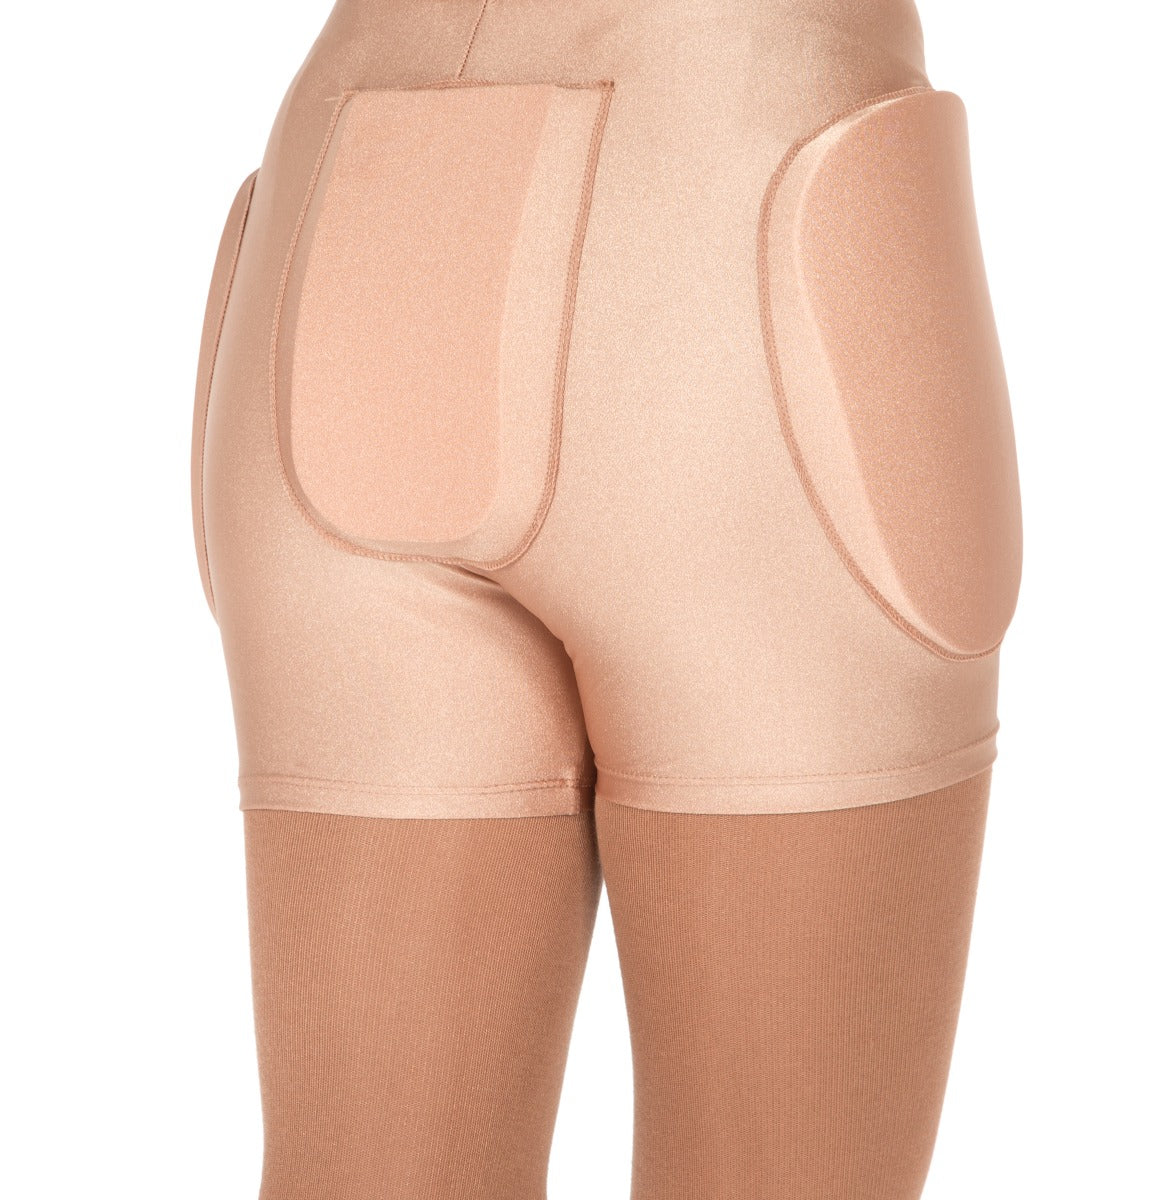 Protective Padded Shorts by Jerry's Beige or Black (Kids)